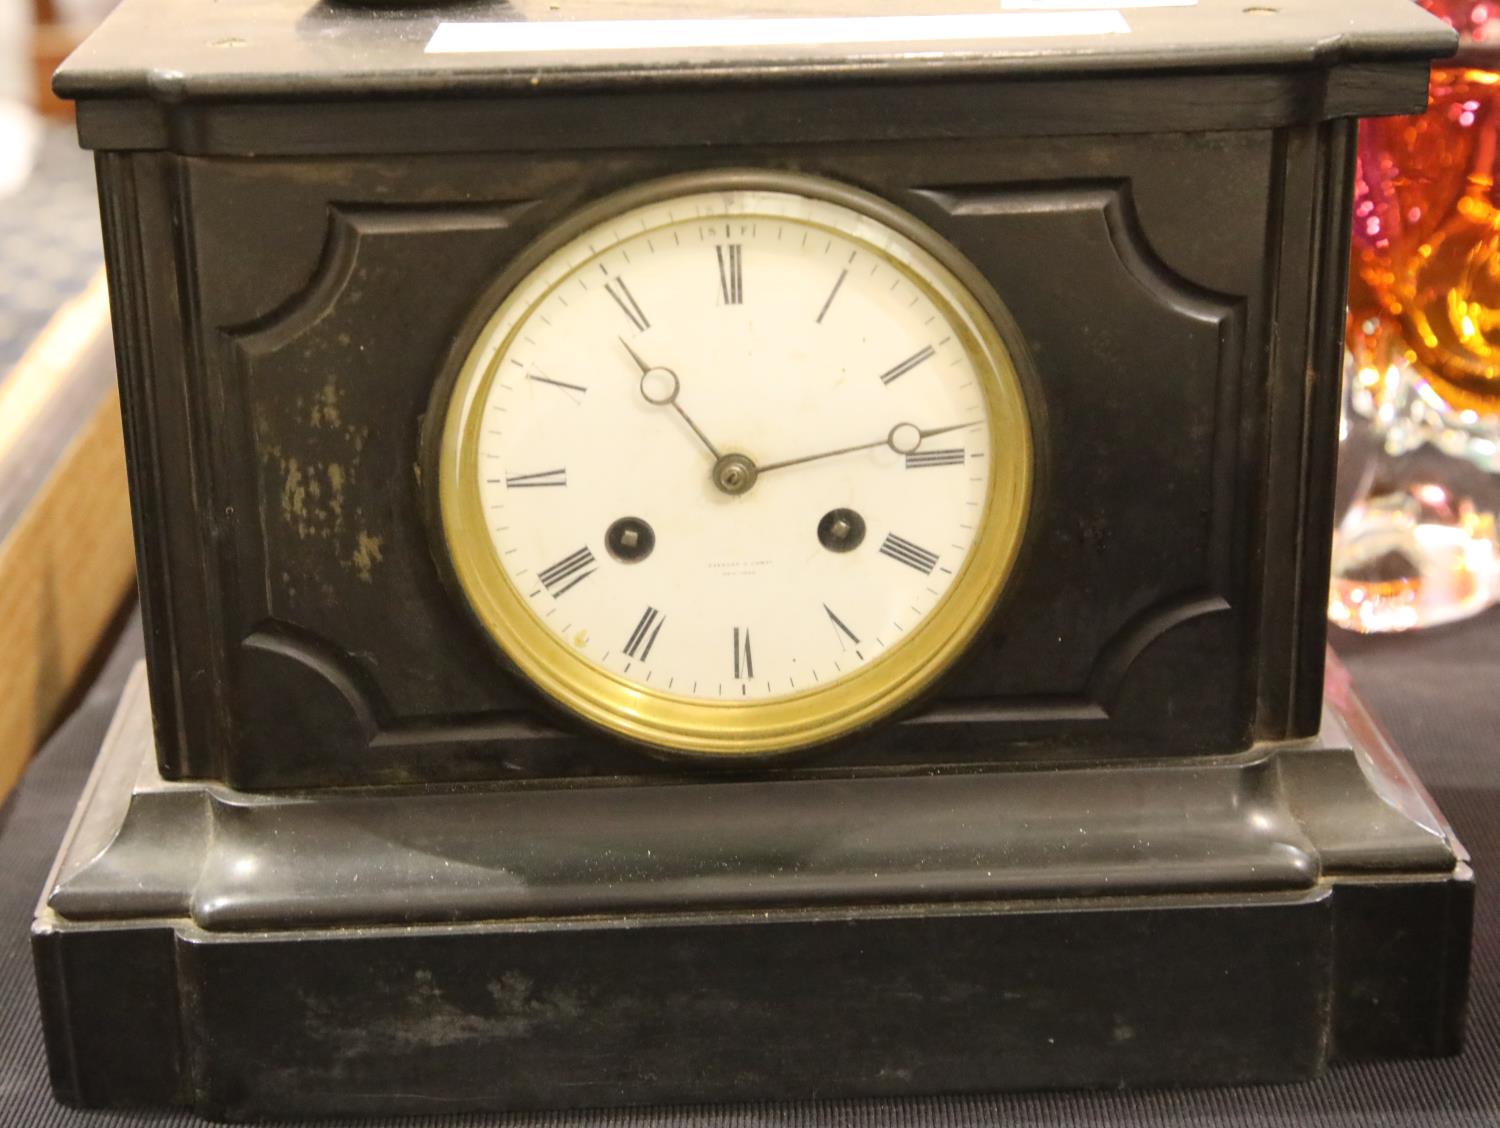 Slate mantel clock face marked Tiffany and company New York with pendulum. Loose top not striking